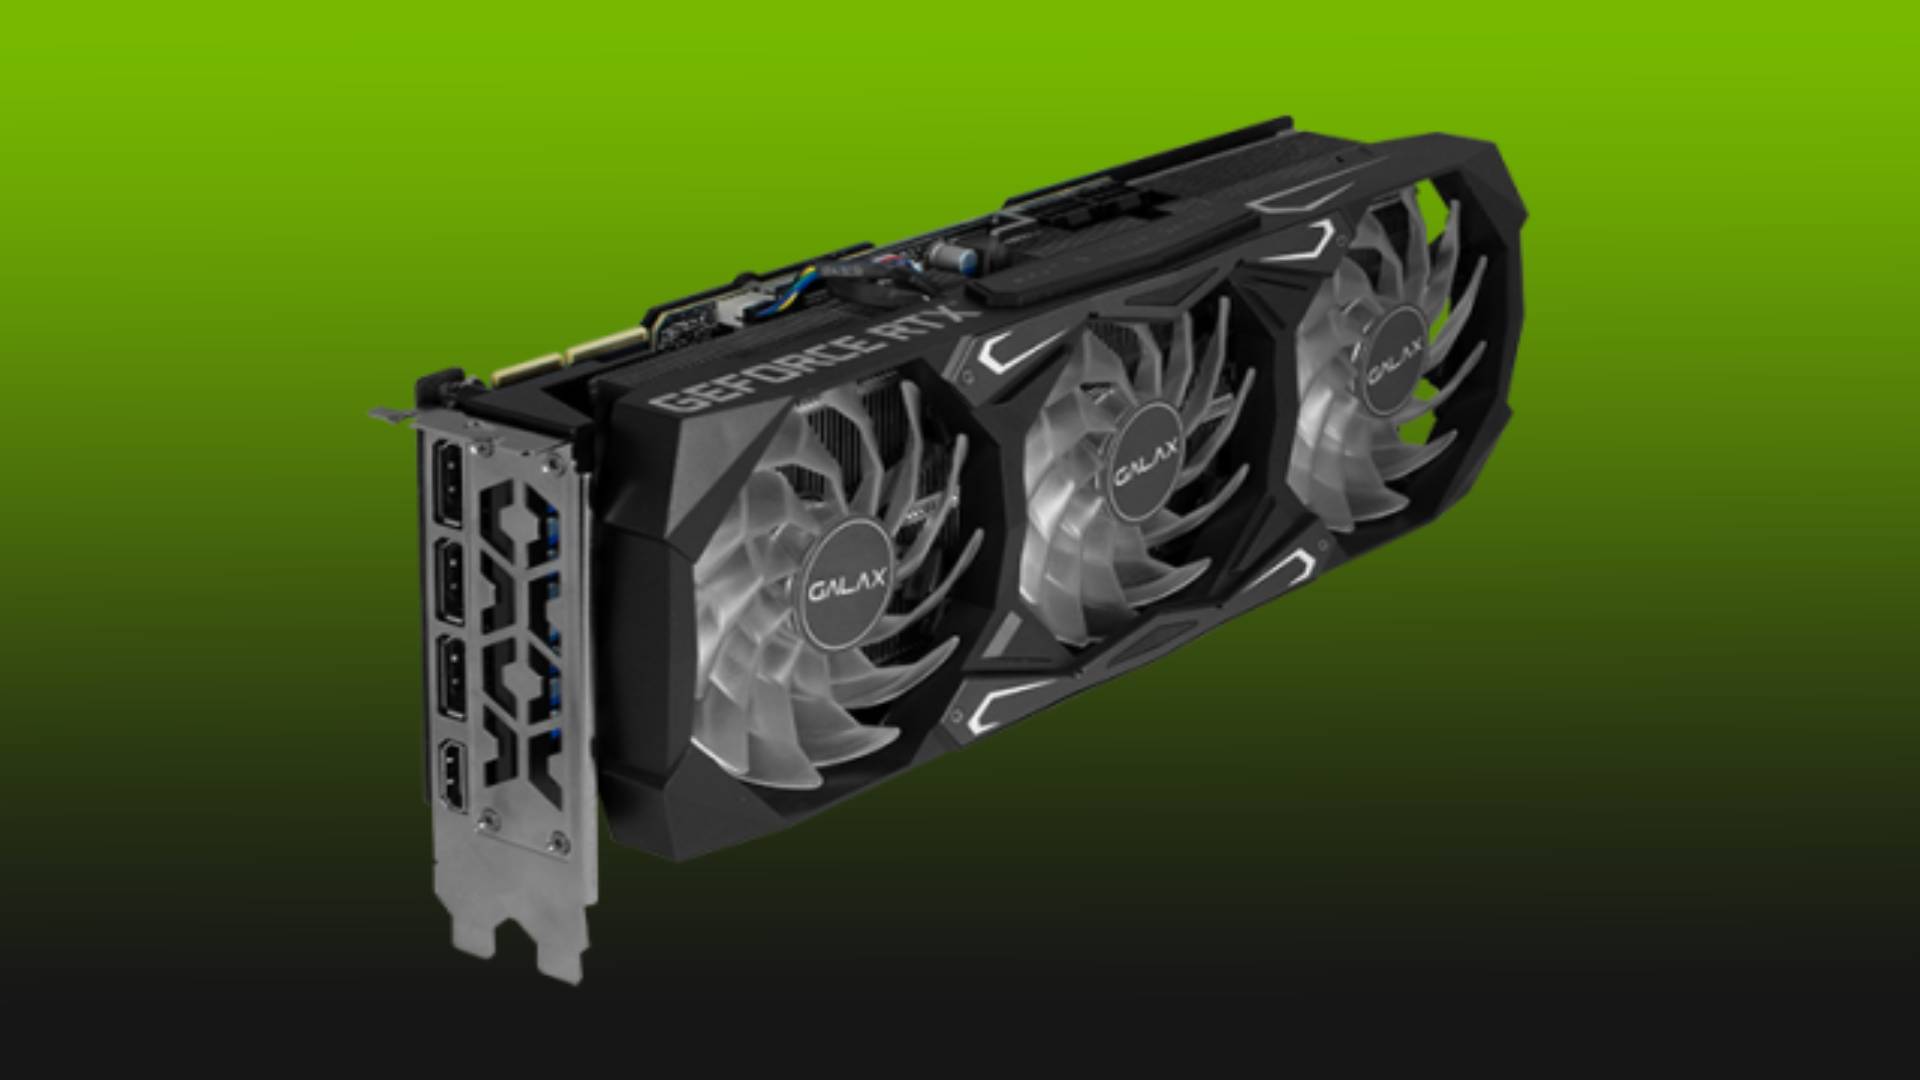 Nvidia's RTX 3090 Ti graphics card could cost near $4,000